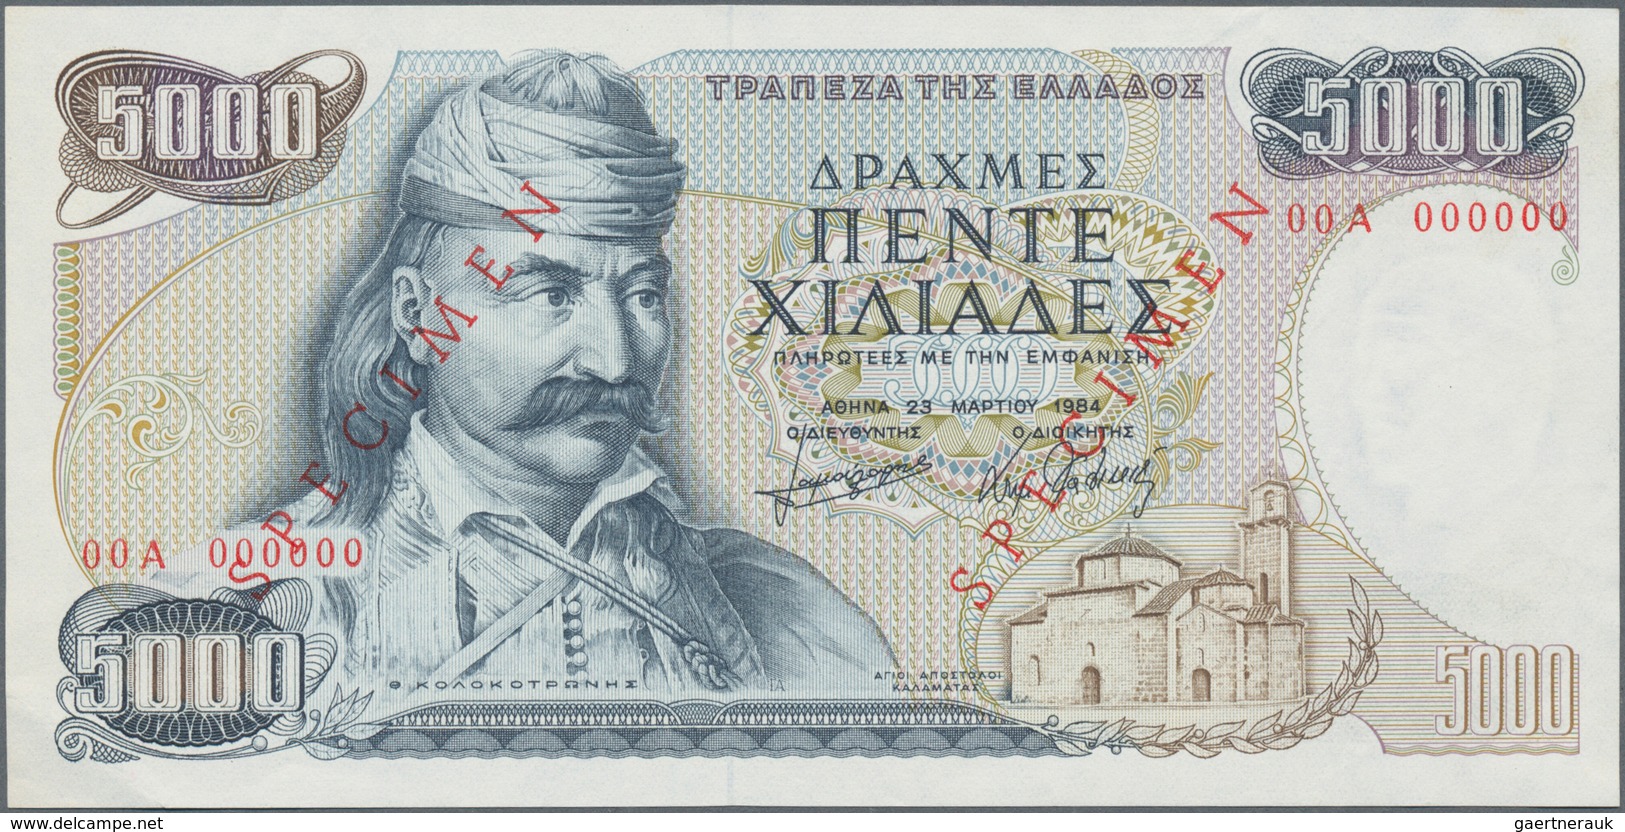 Greece / Griechenland: 5000 Drachmai 1984 SPECIMEN, P.203s, Serial Number 00A 000000 And Red Overpri - Griechenland